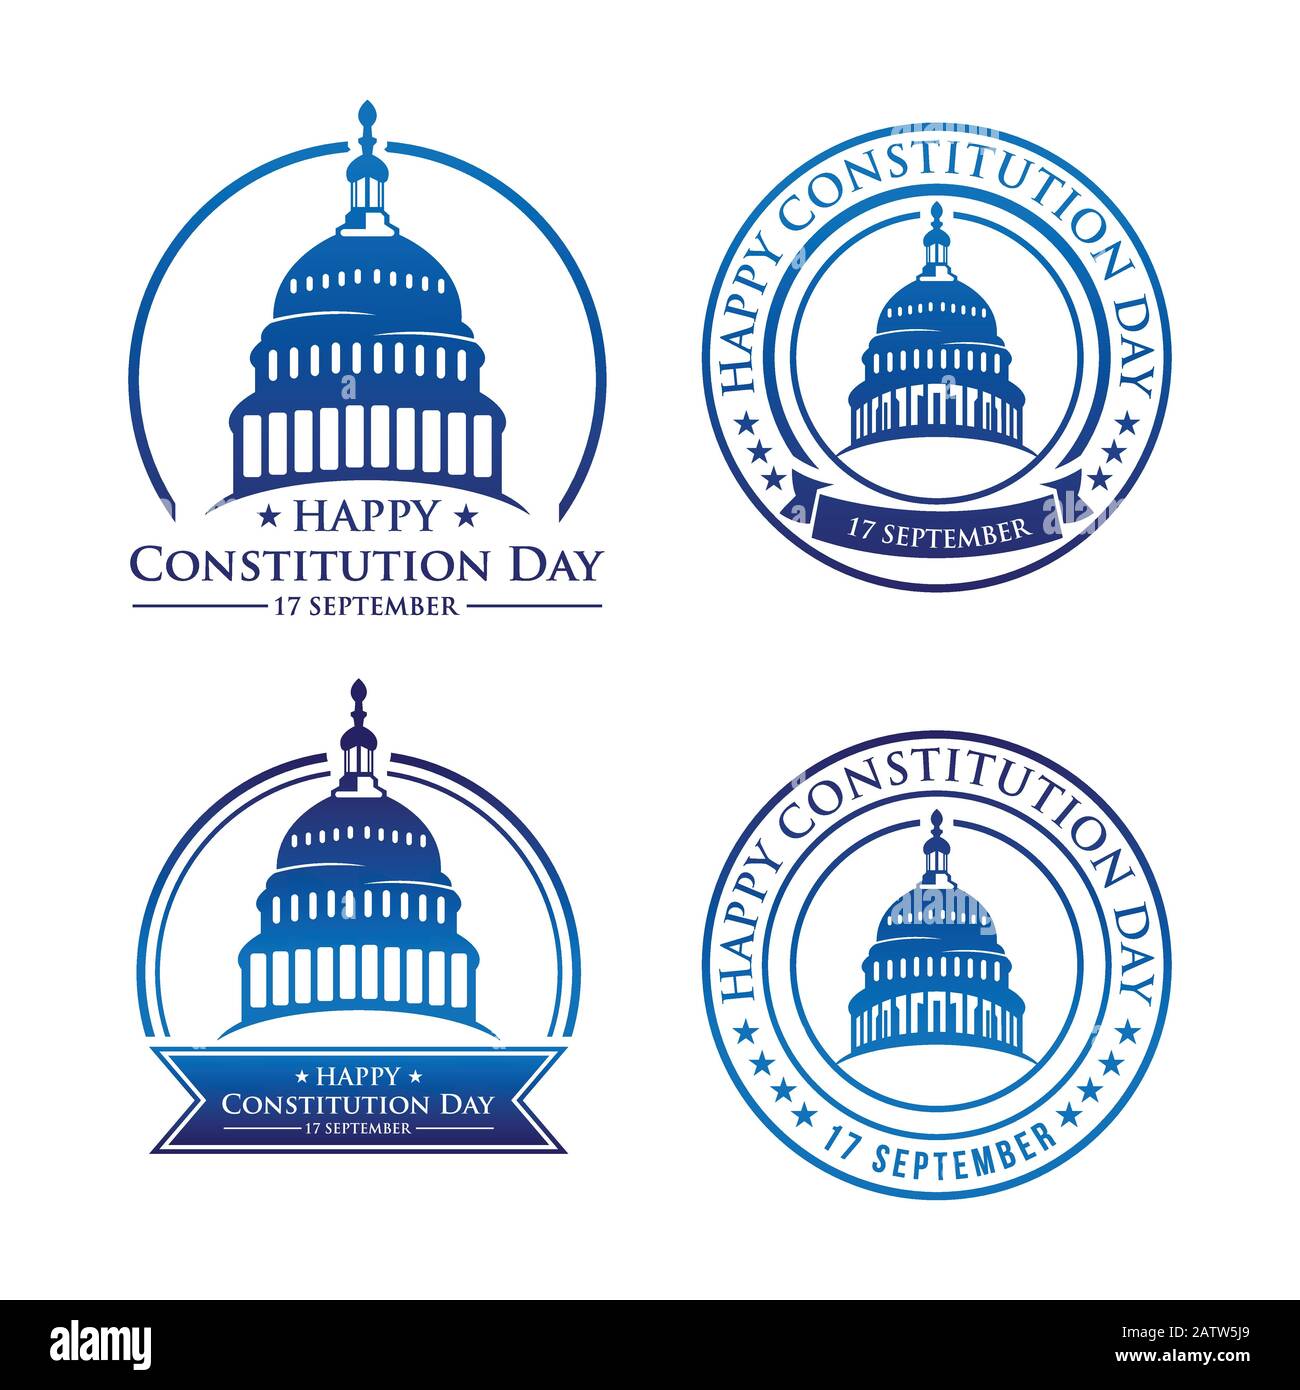 USA constitution day emblems set. 17 september. Isolated vector elements Stock Vector